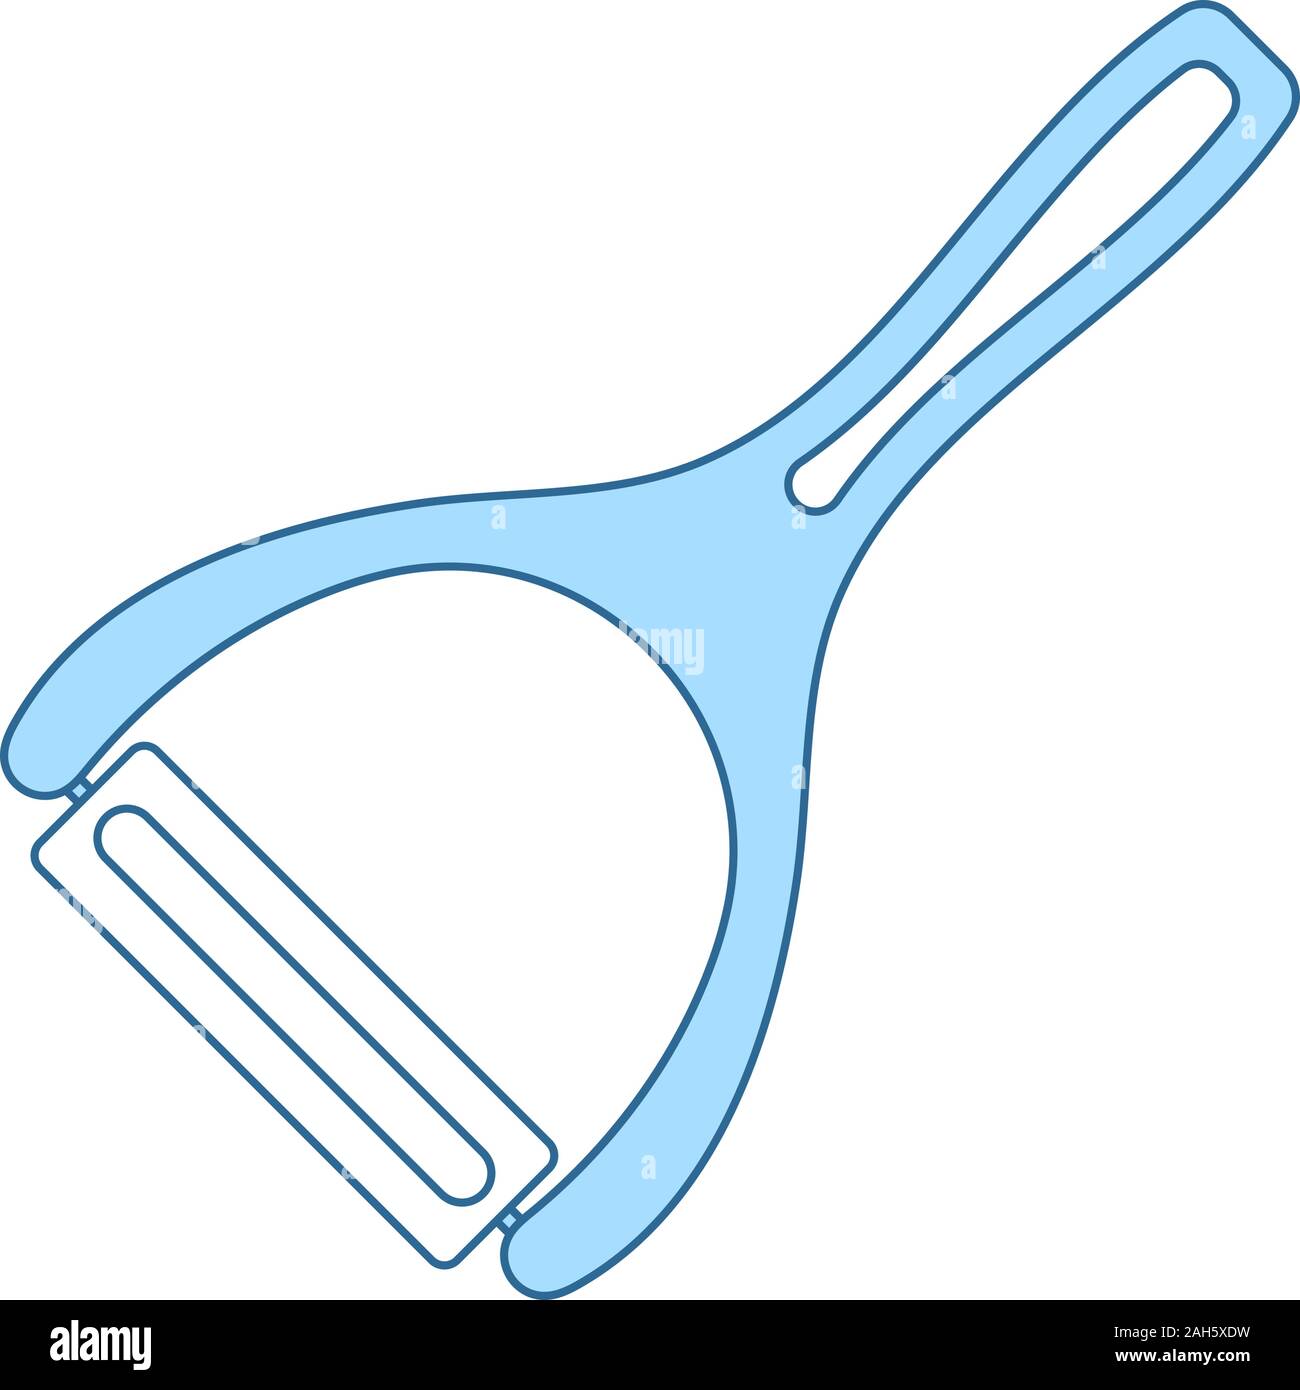 Vegetable Peeler Icon. Thin Line With Blue Fill Design. Vector Illustration. Stock Vector